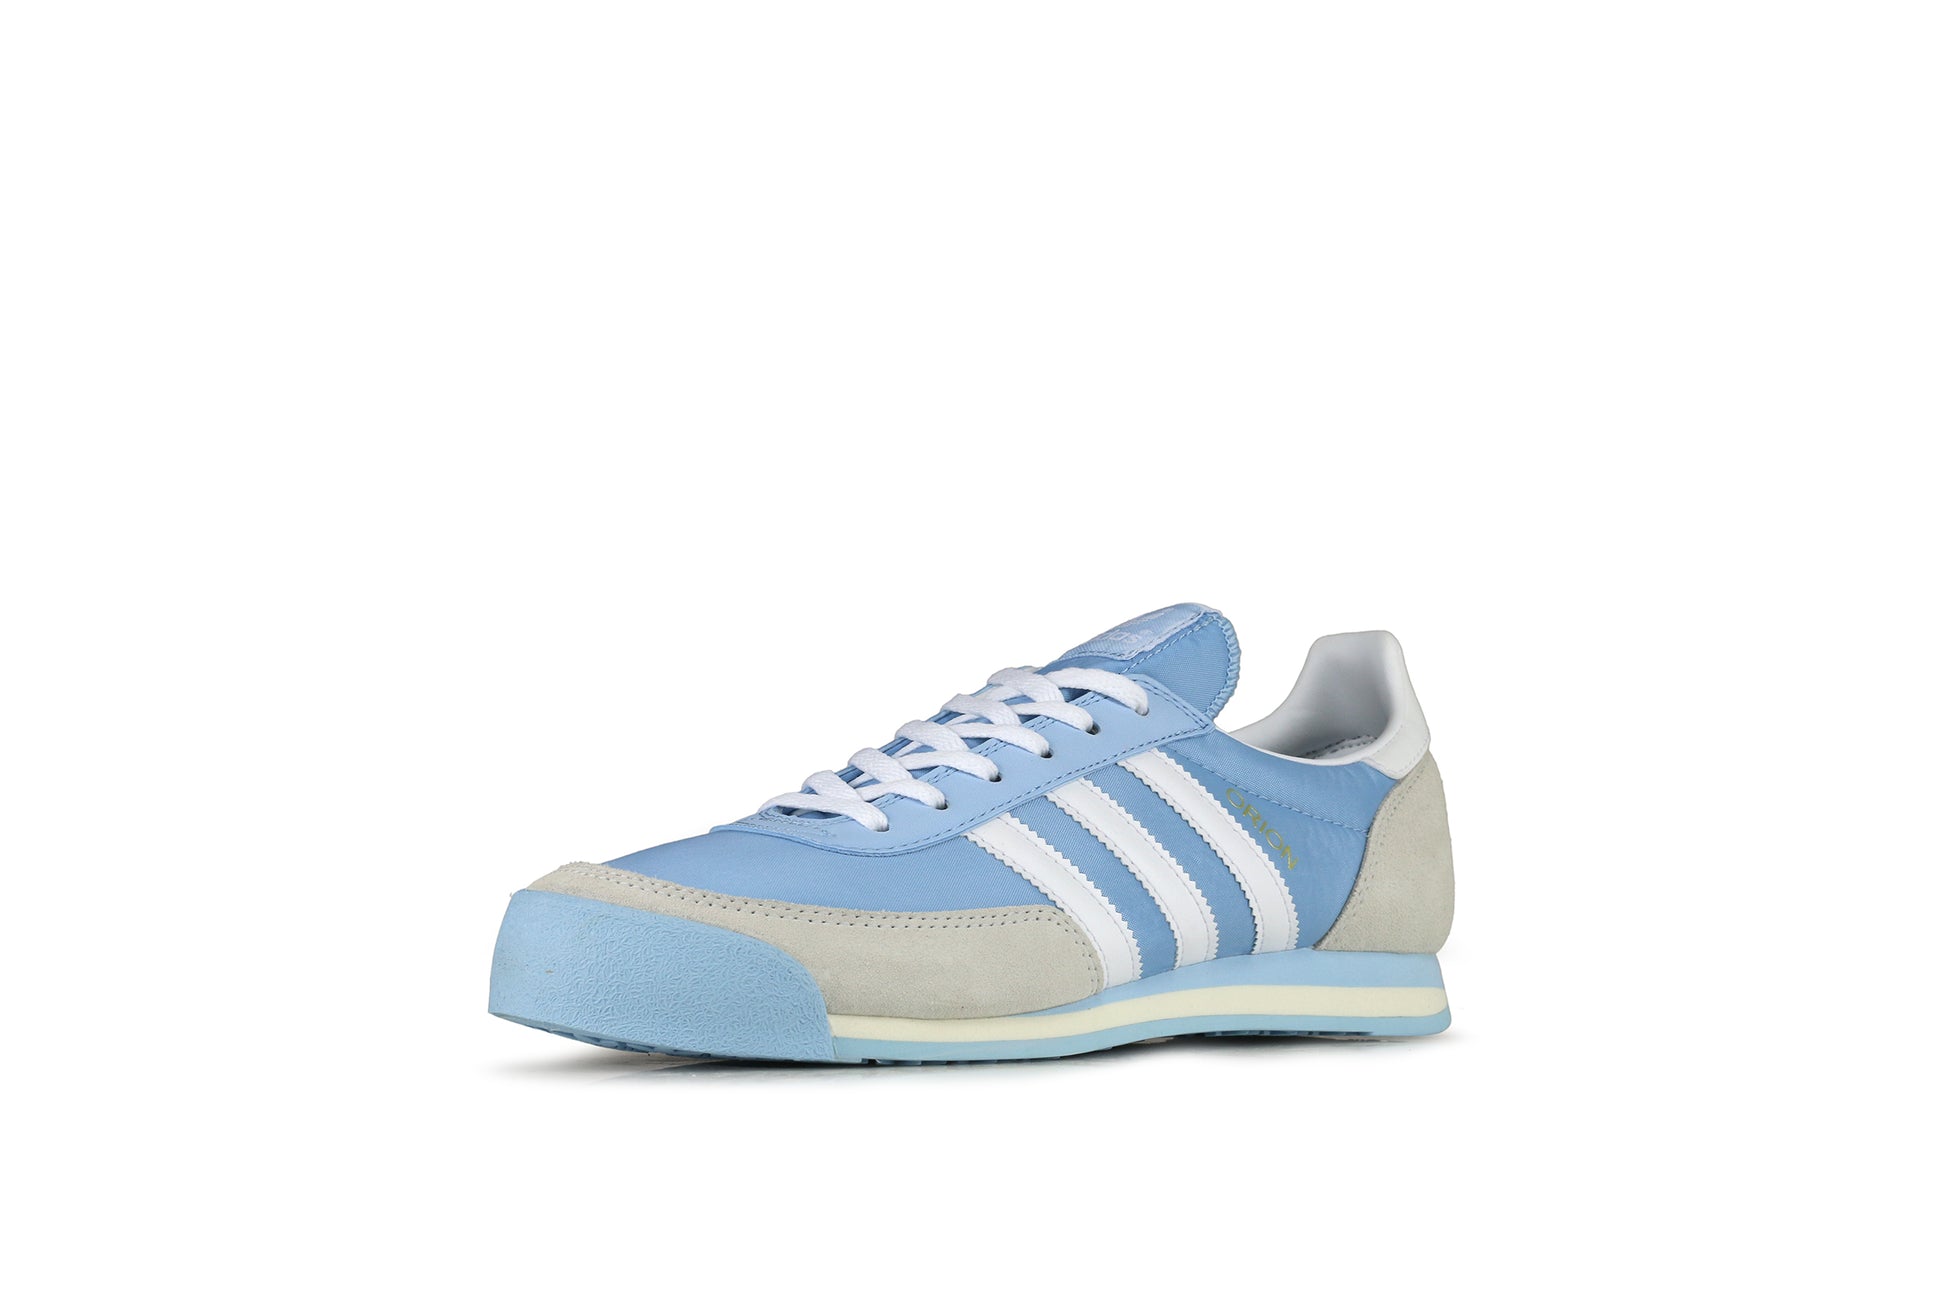 adidas avenue a 2018 price in pakistan and spec